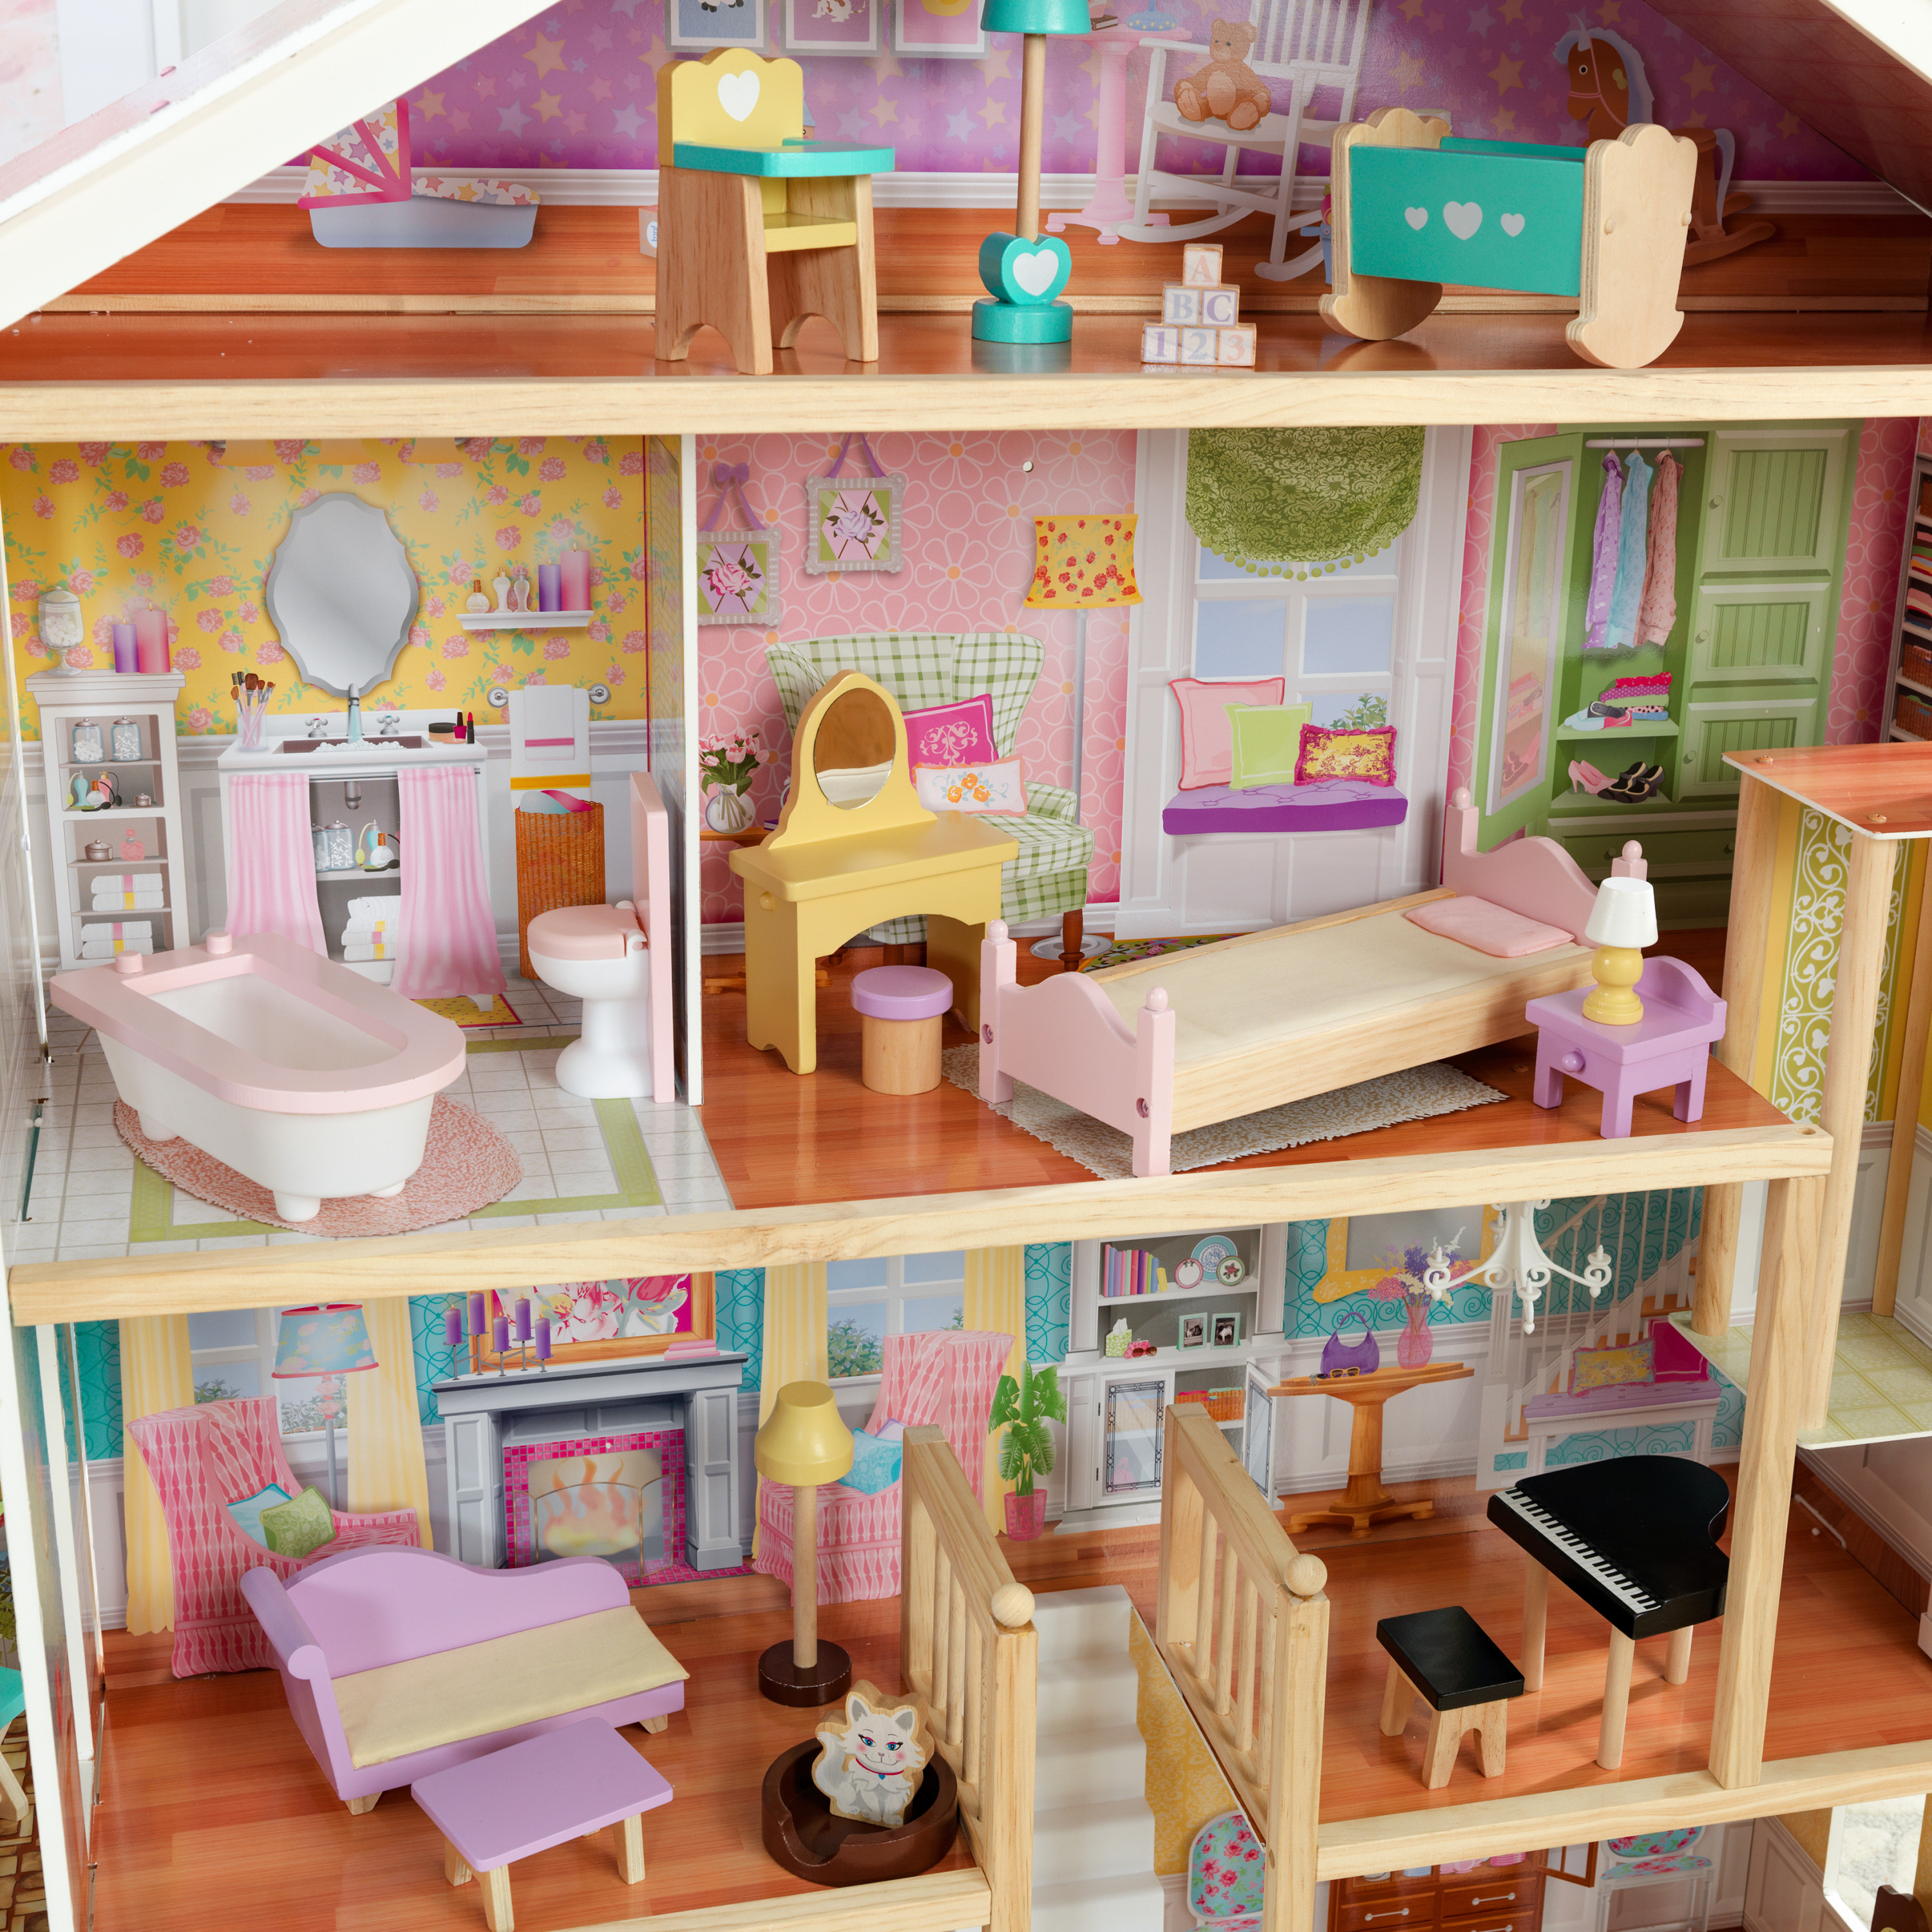 KidKraft Grand View Mansion Wooden Dollhouse with 34 Accessories, Ages 3 and up - image 5 of 14